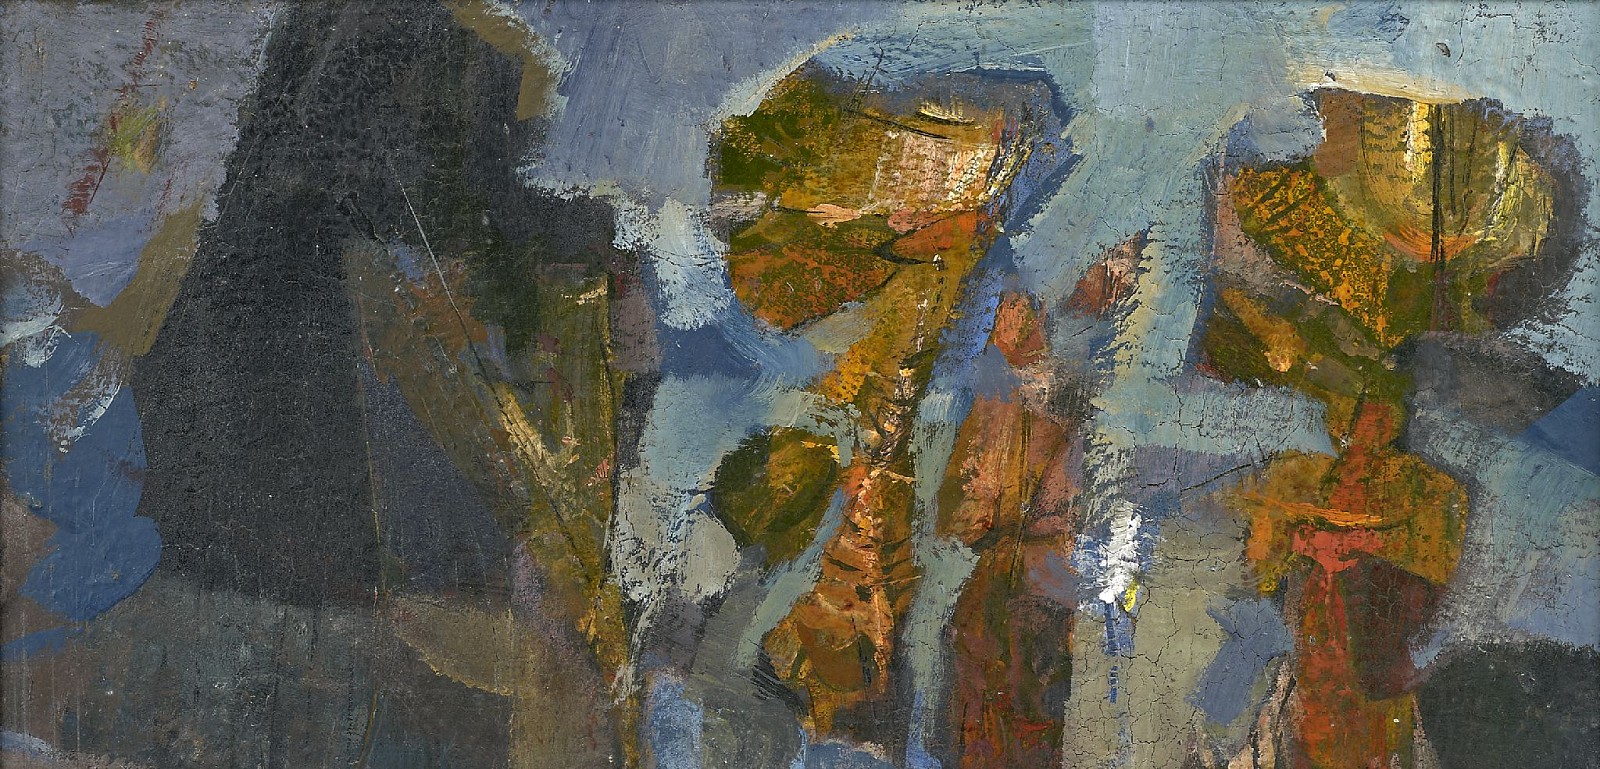 Syd Solomon, Yield of the Creek | SOLD, 1957
Ink, gouache and oil on canvas on wood panel, 14 1/2 x 30 in. (36.8 x 76.2 cm)
© Estate of Syd Solomon
SOL-00014